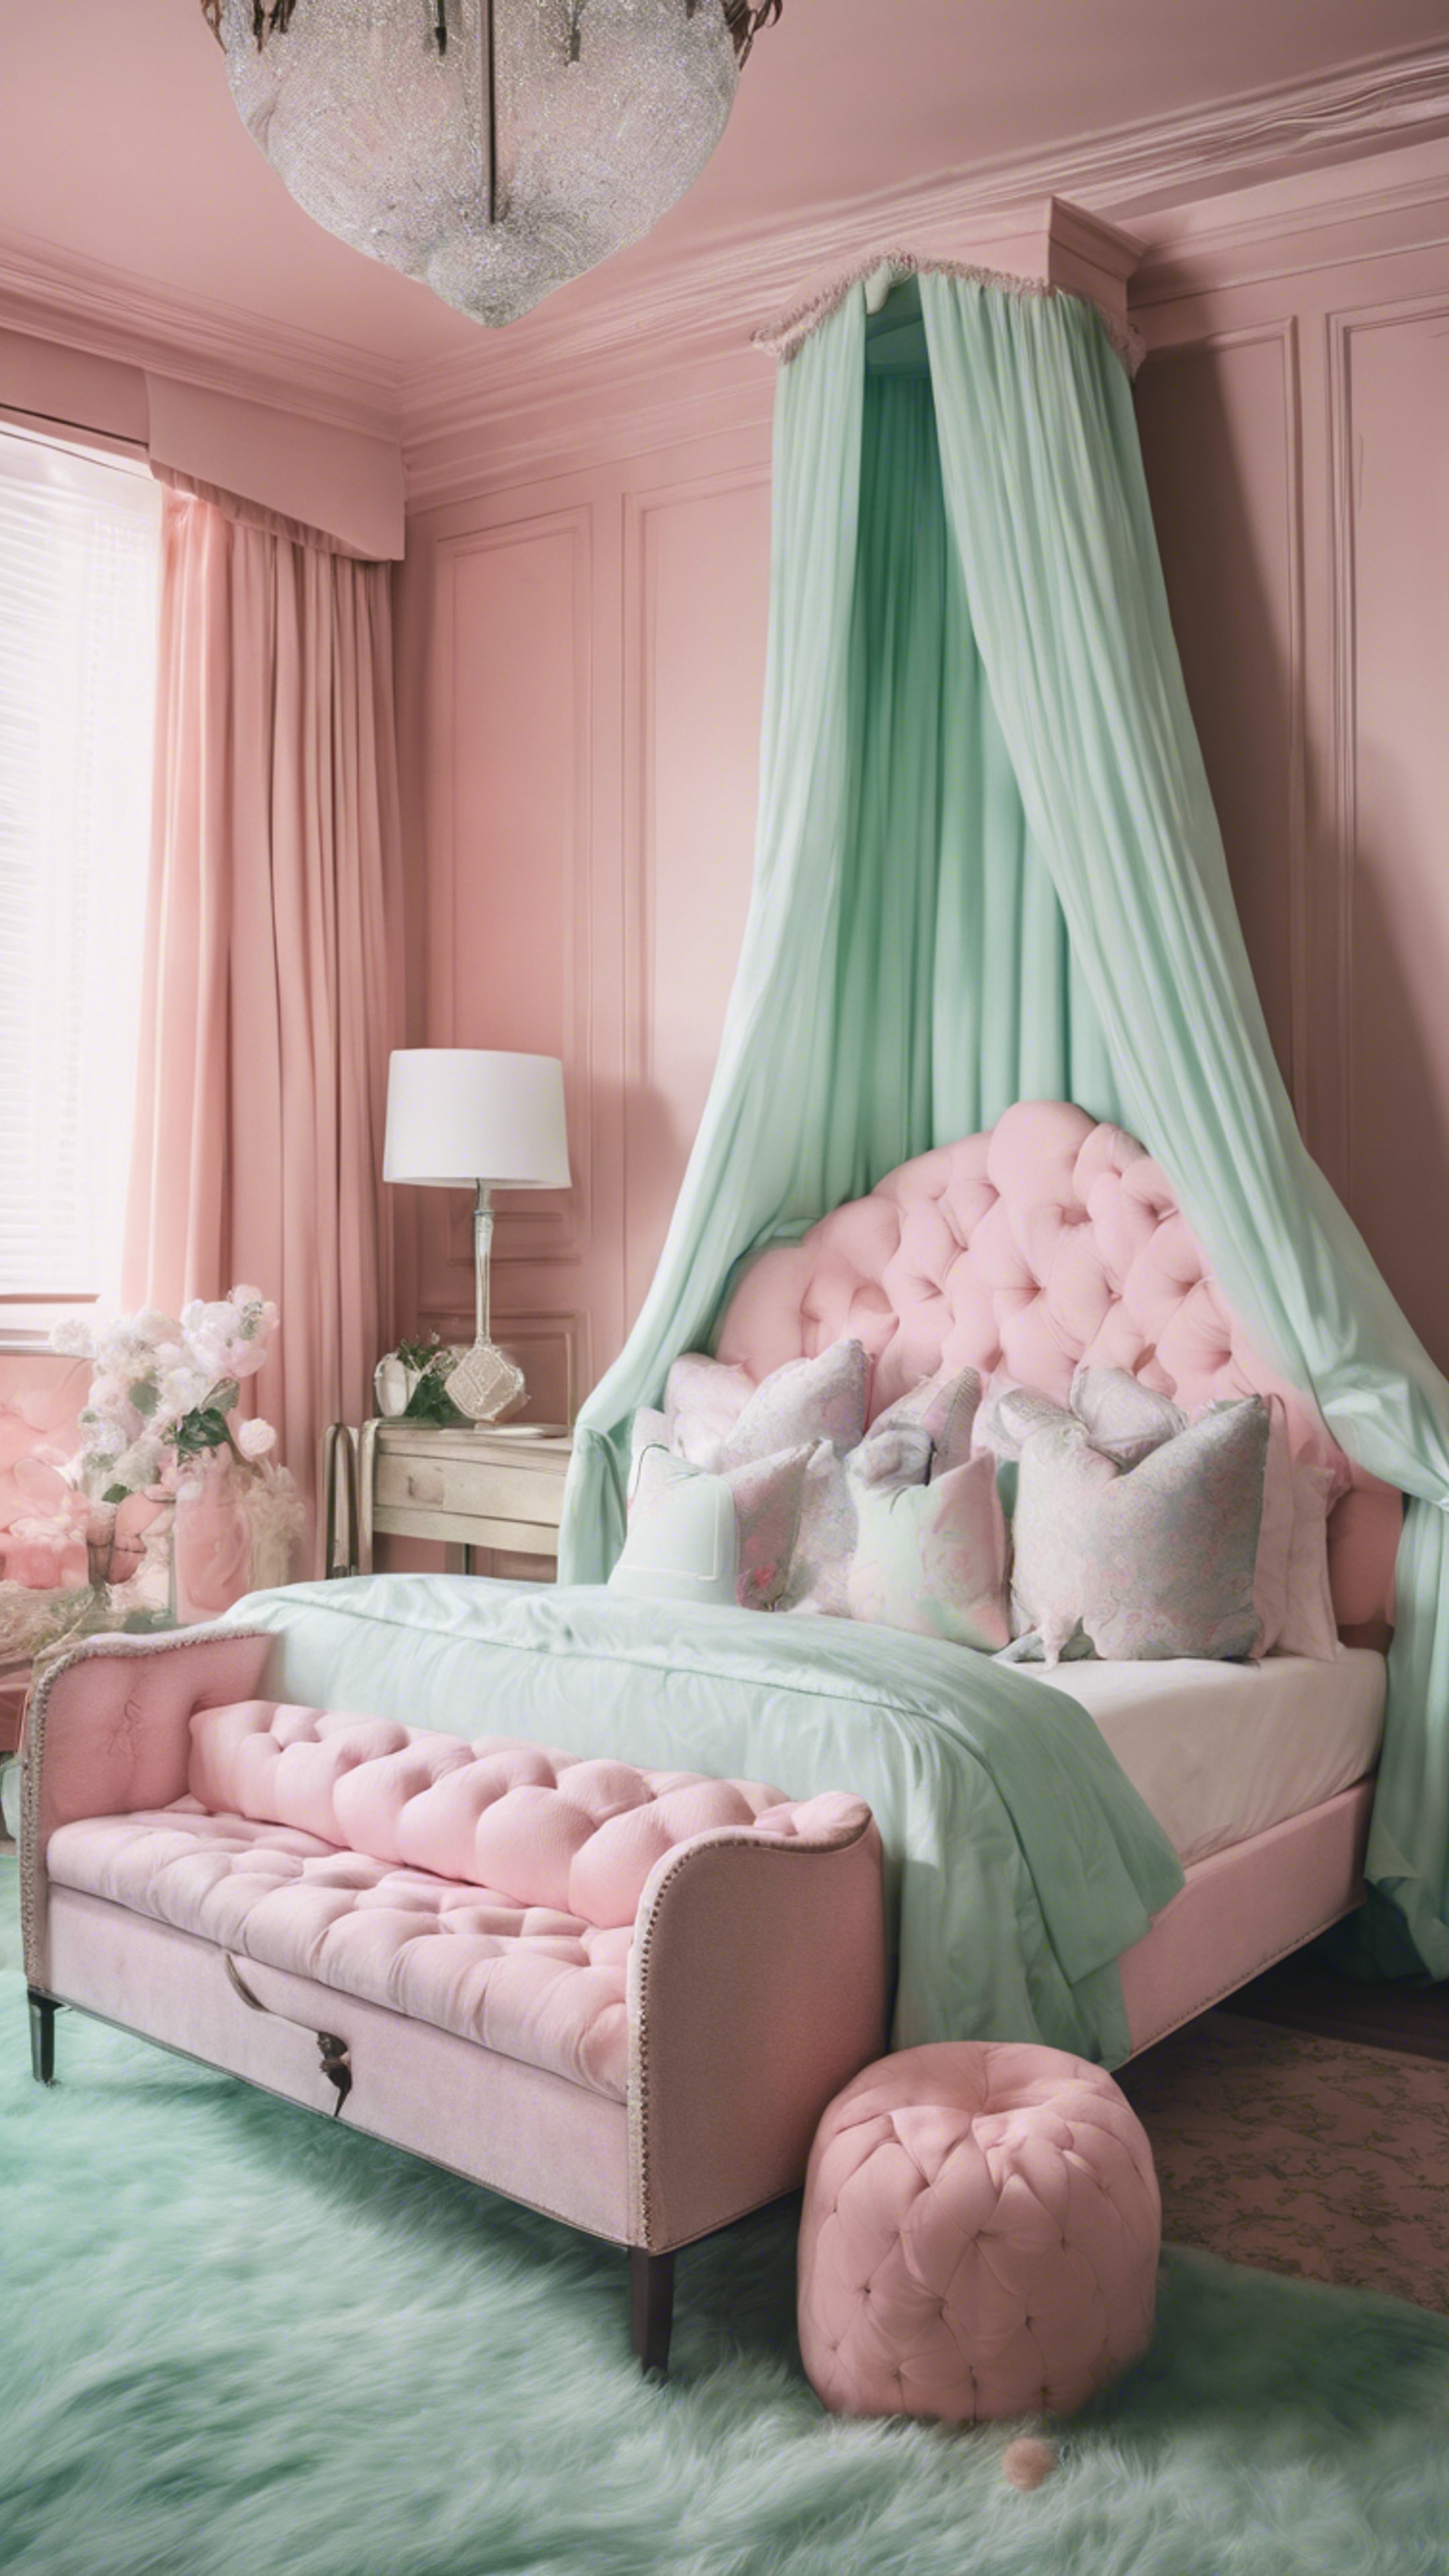 A sprawling pink and mint green preppy-style bedroom with a canopy bed and monogrammed pillows. Tapeta[80ed71ae36e84fc093e2]